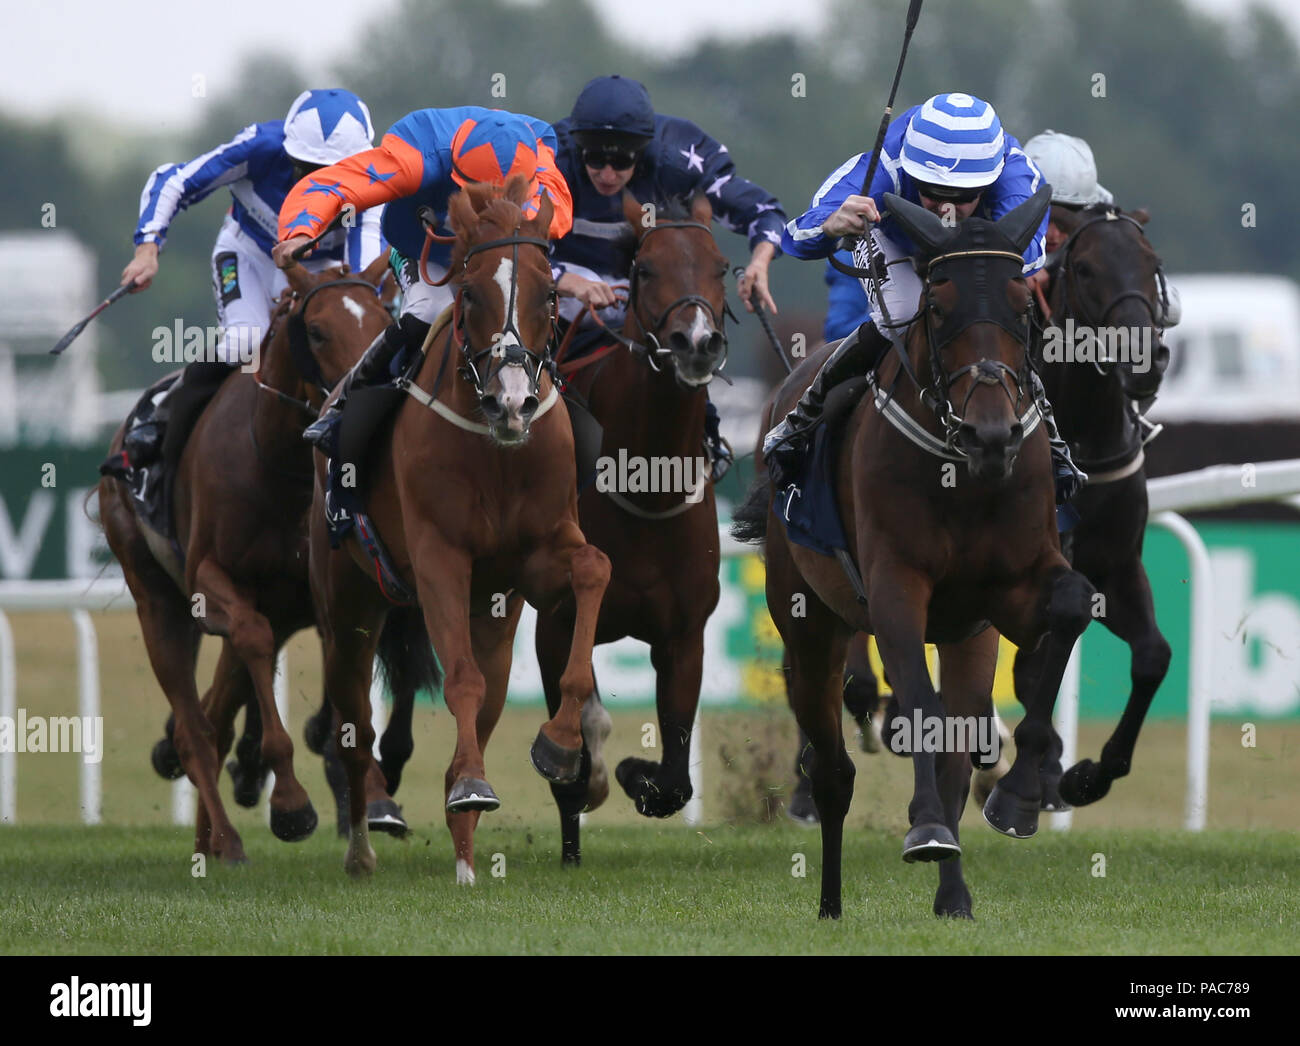 Stratum ridden by Robert Winston (right) lead the field home to win The JLT Cup run during Weatherbys Super Sprint Day at Newbury Racecourse, Newbury. Stock Photo